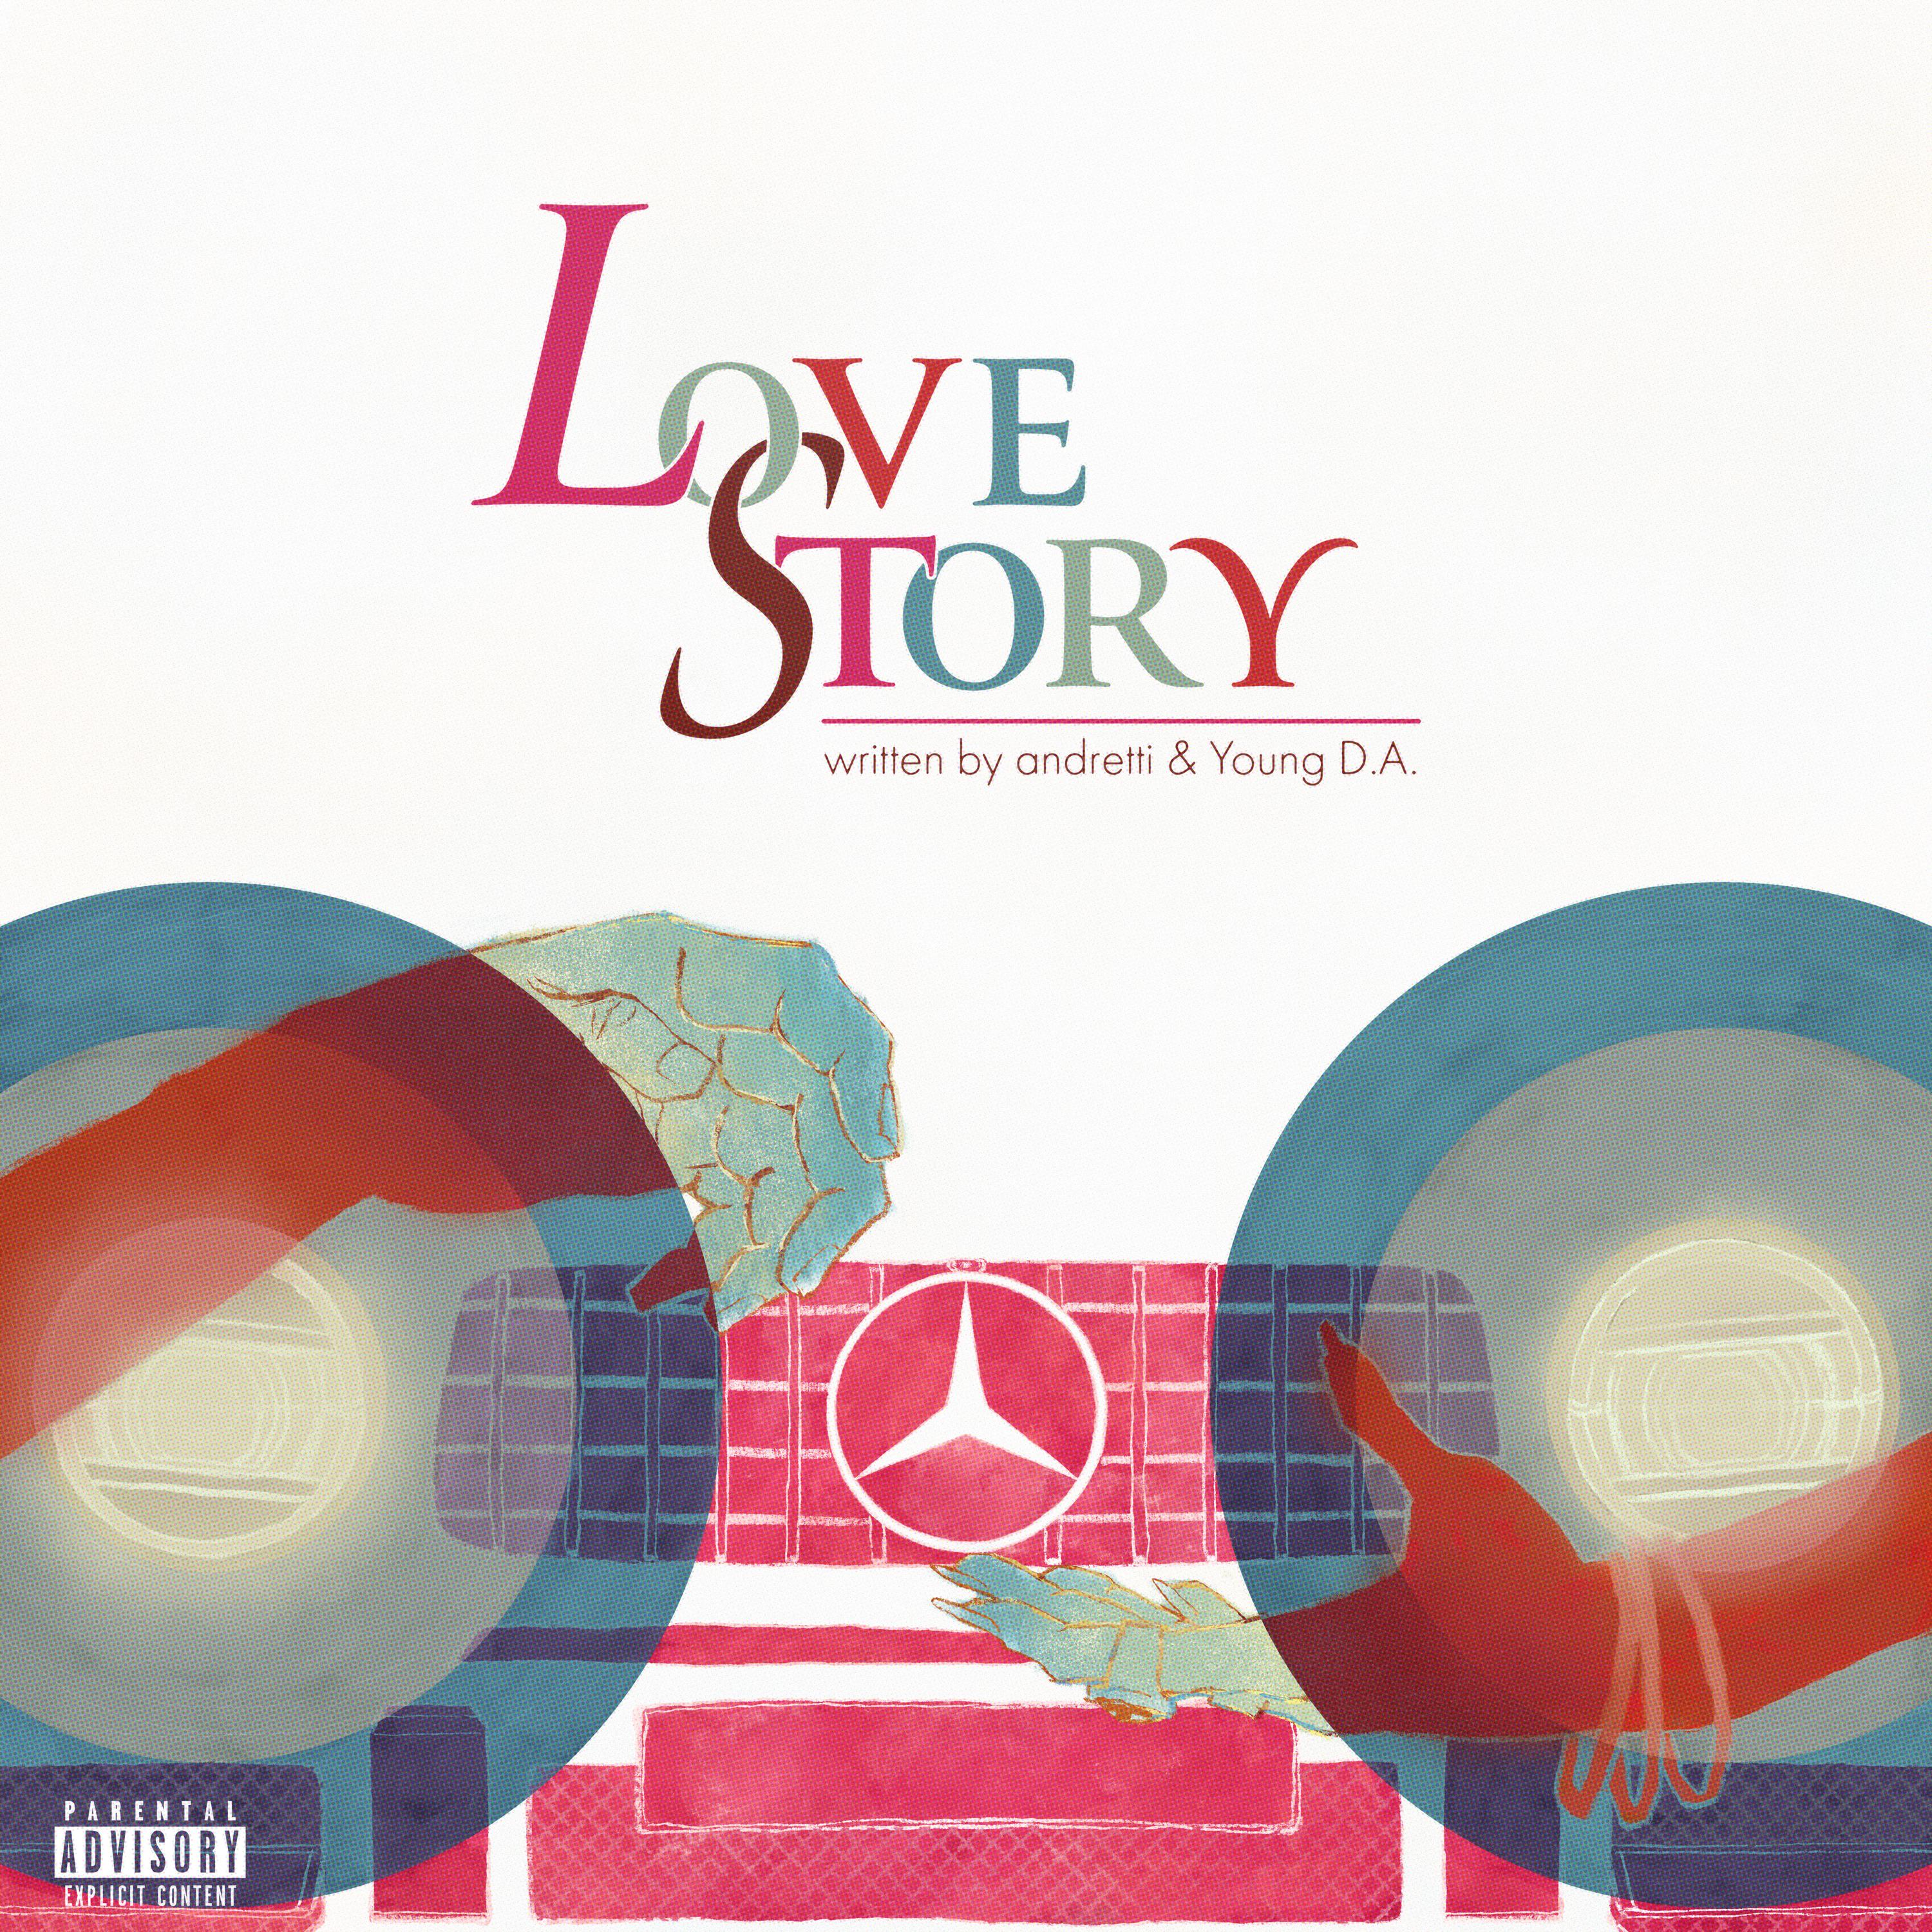 Young D.A. - love story